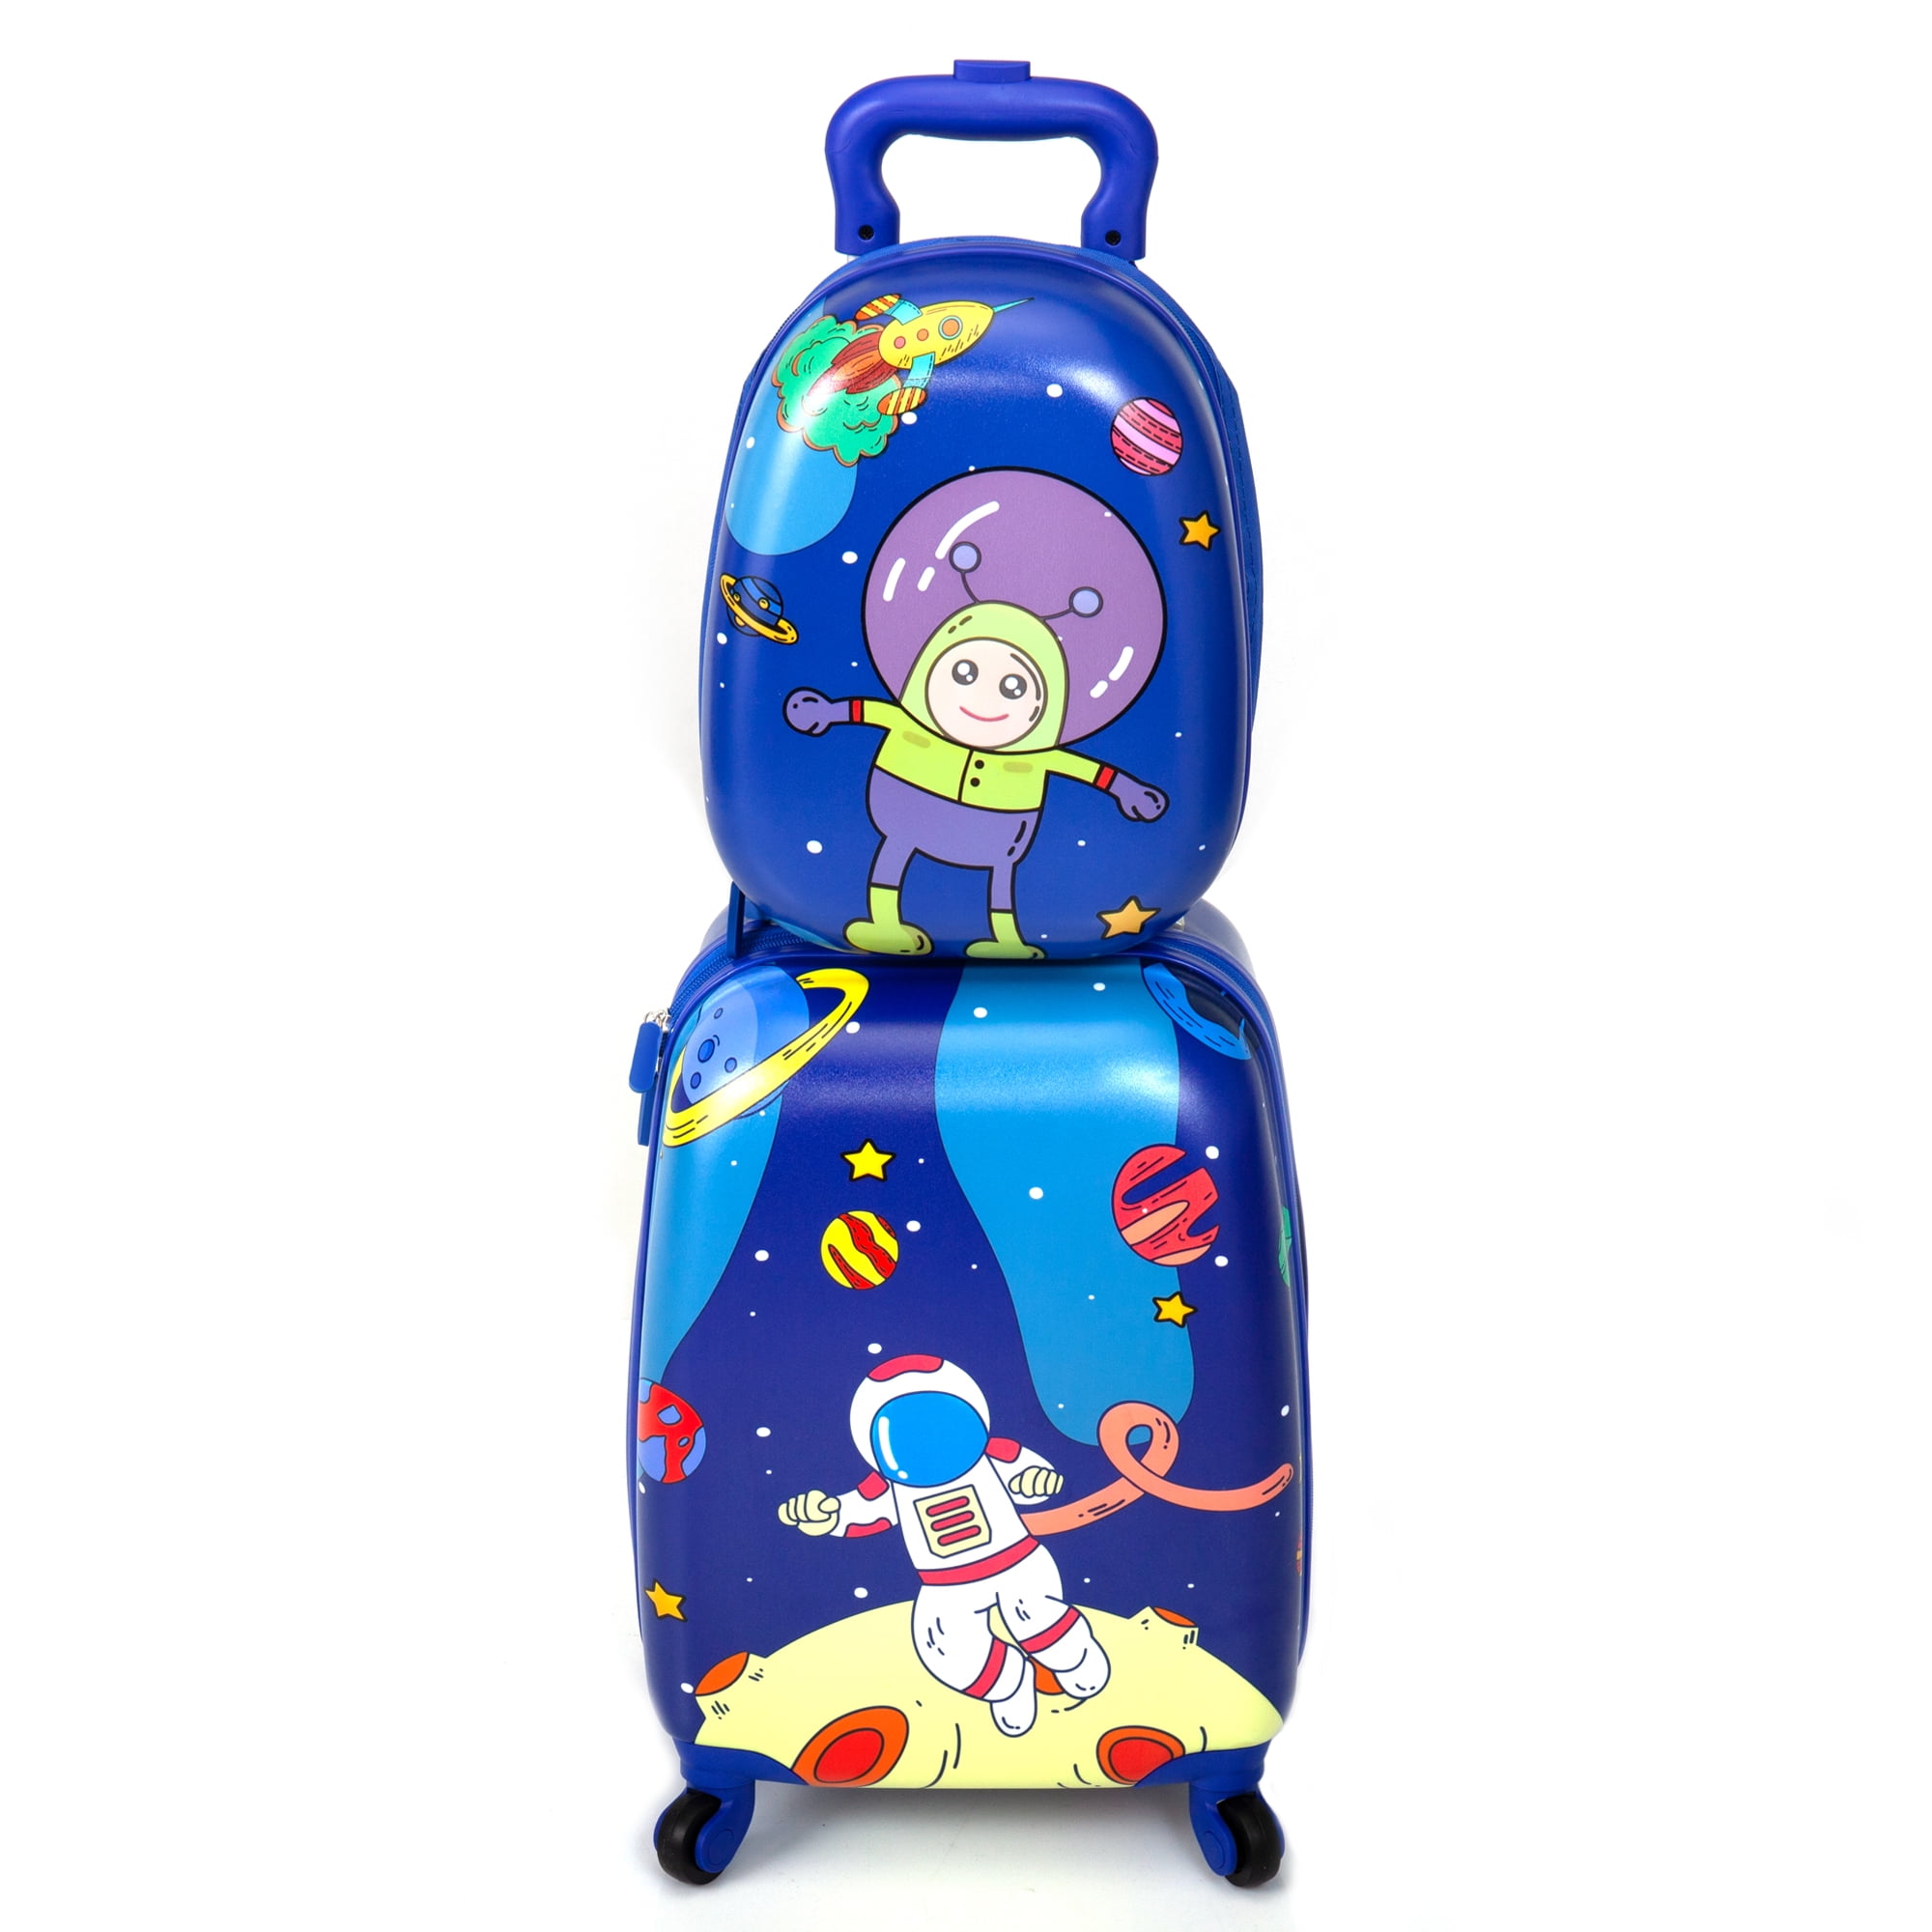 Dropship 2 PCS Kids Luggage Set, 12 Backpack And 16 Spinner Case